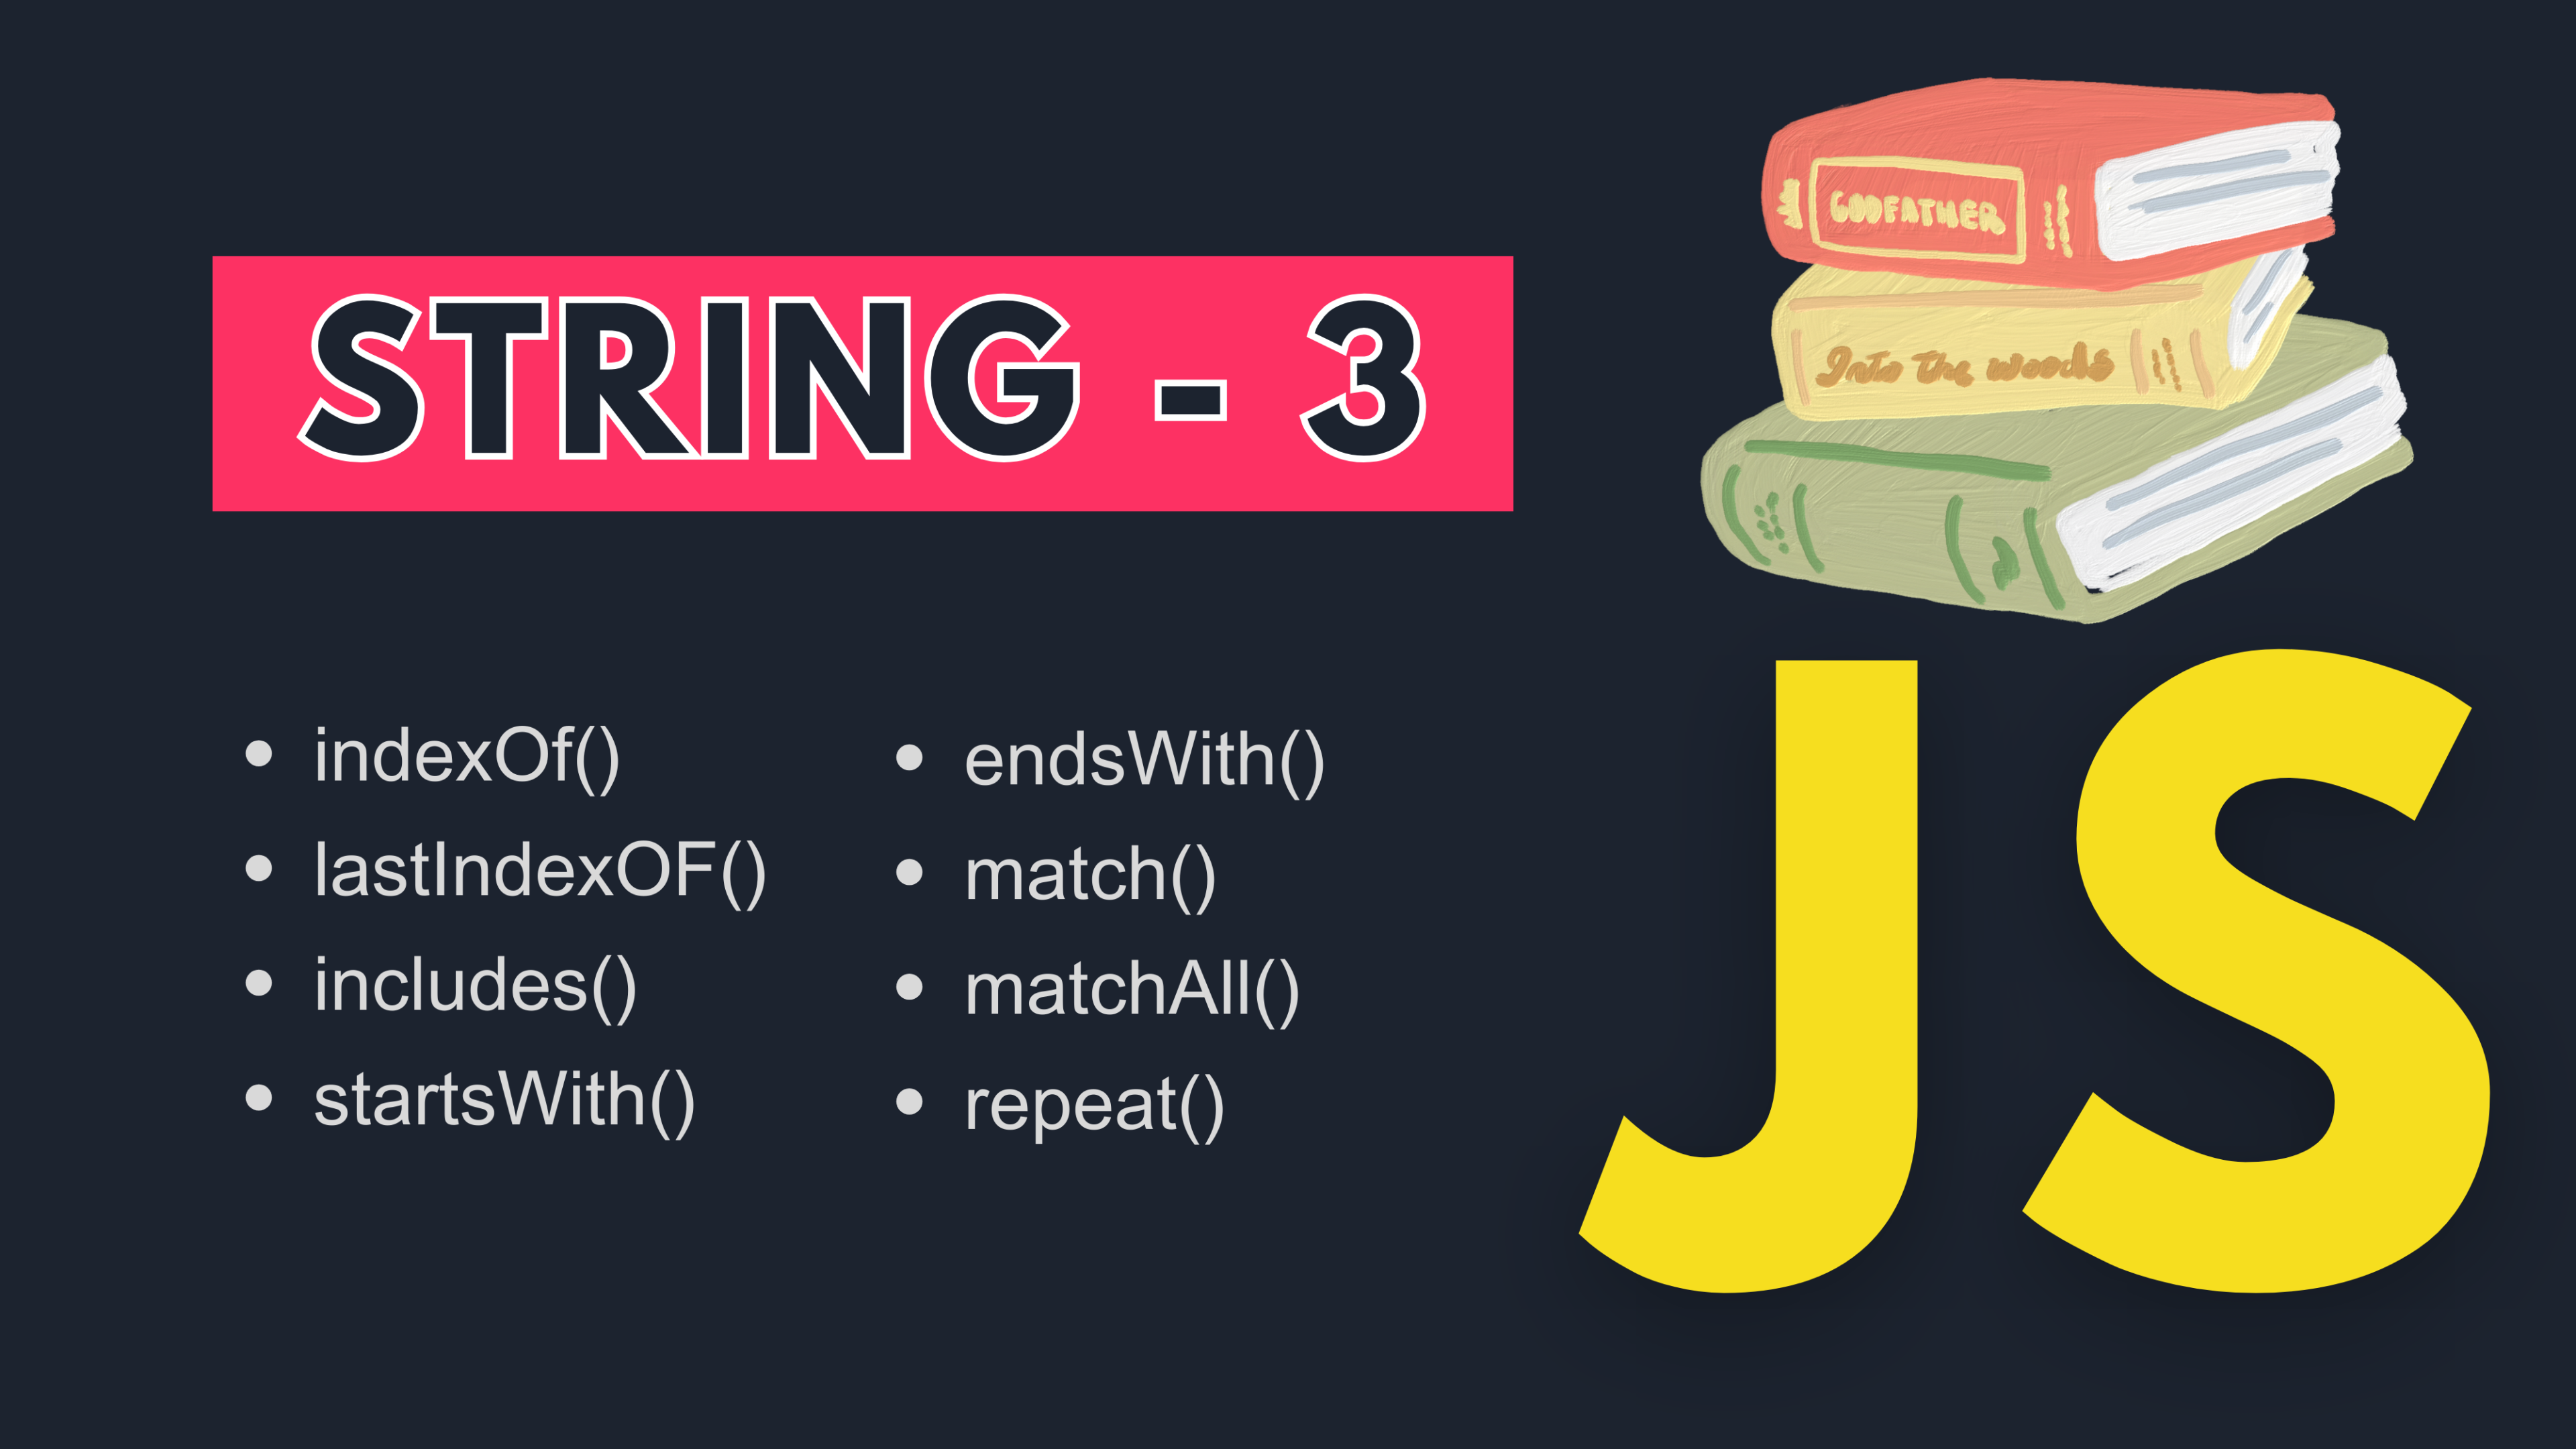 Cover Image for Mastering JavaScript | 8 STRING METHODS | PART 3